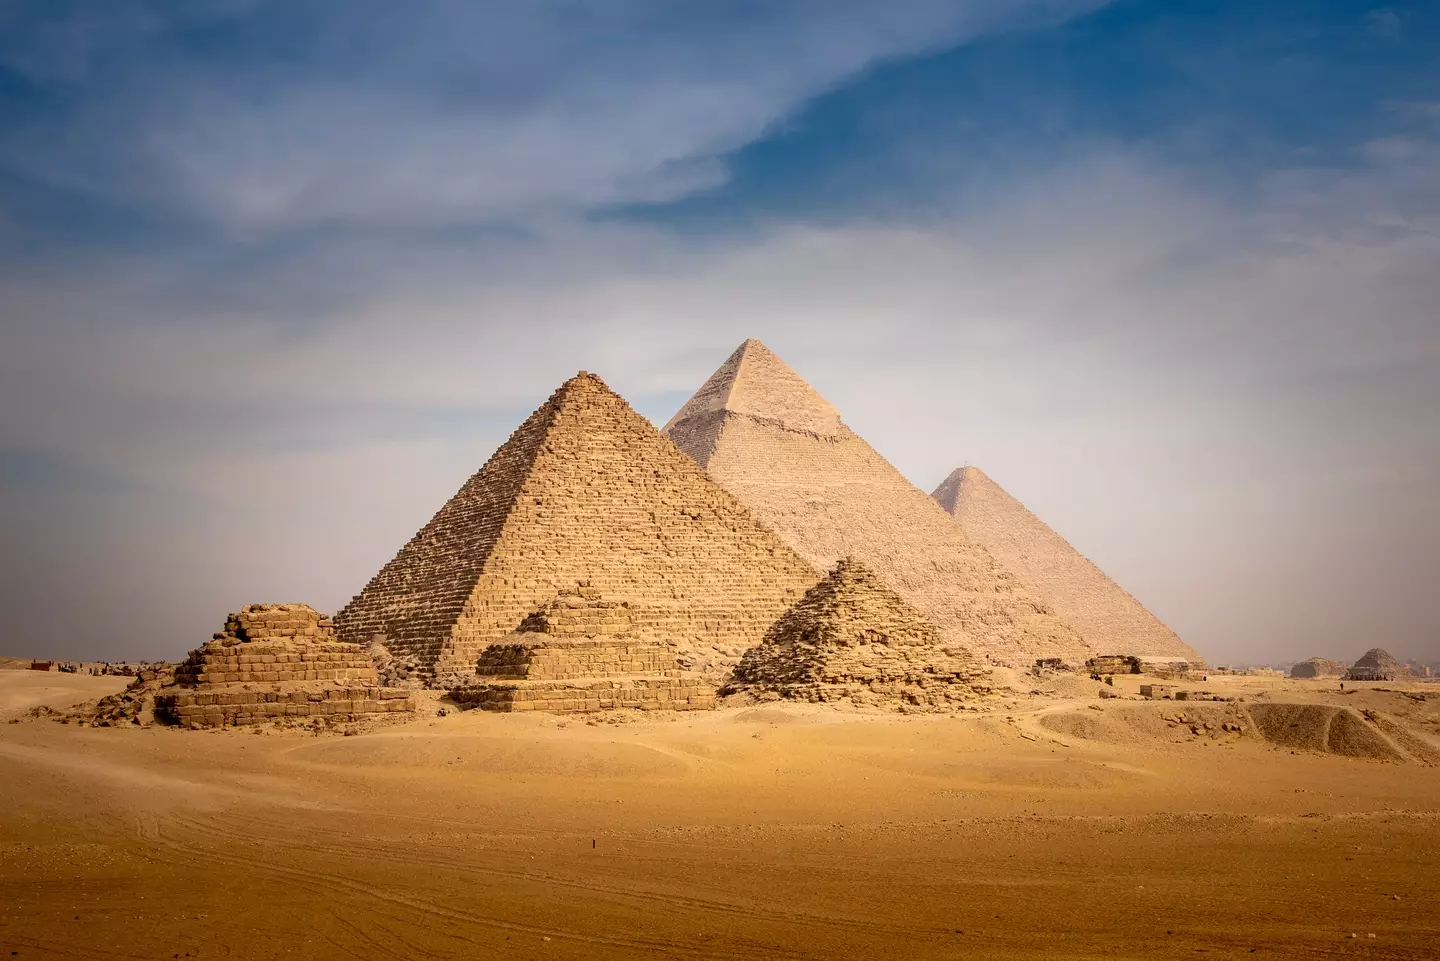 Pyramids of Giza (Getty Images)